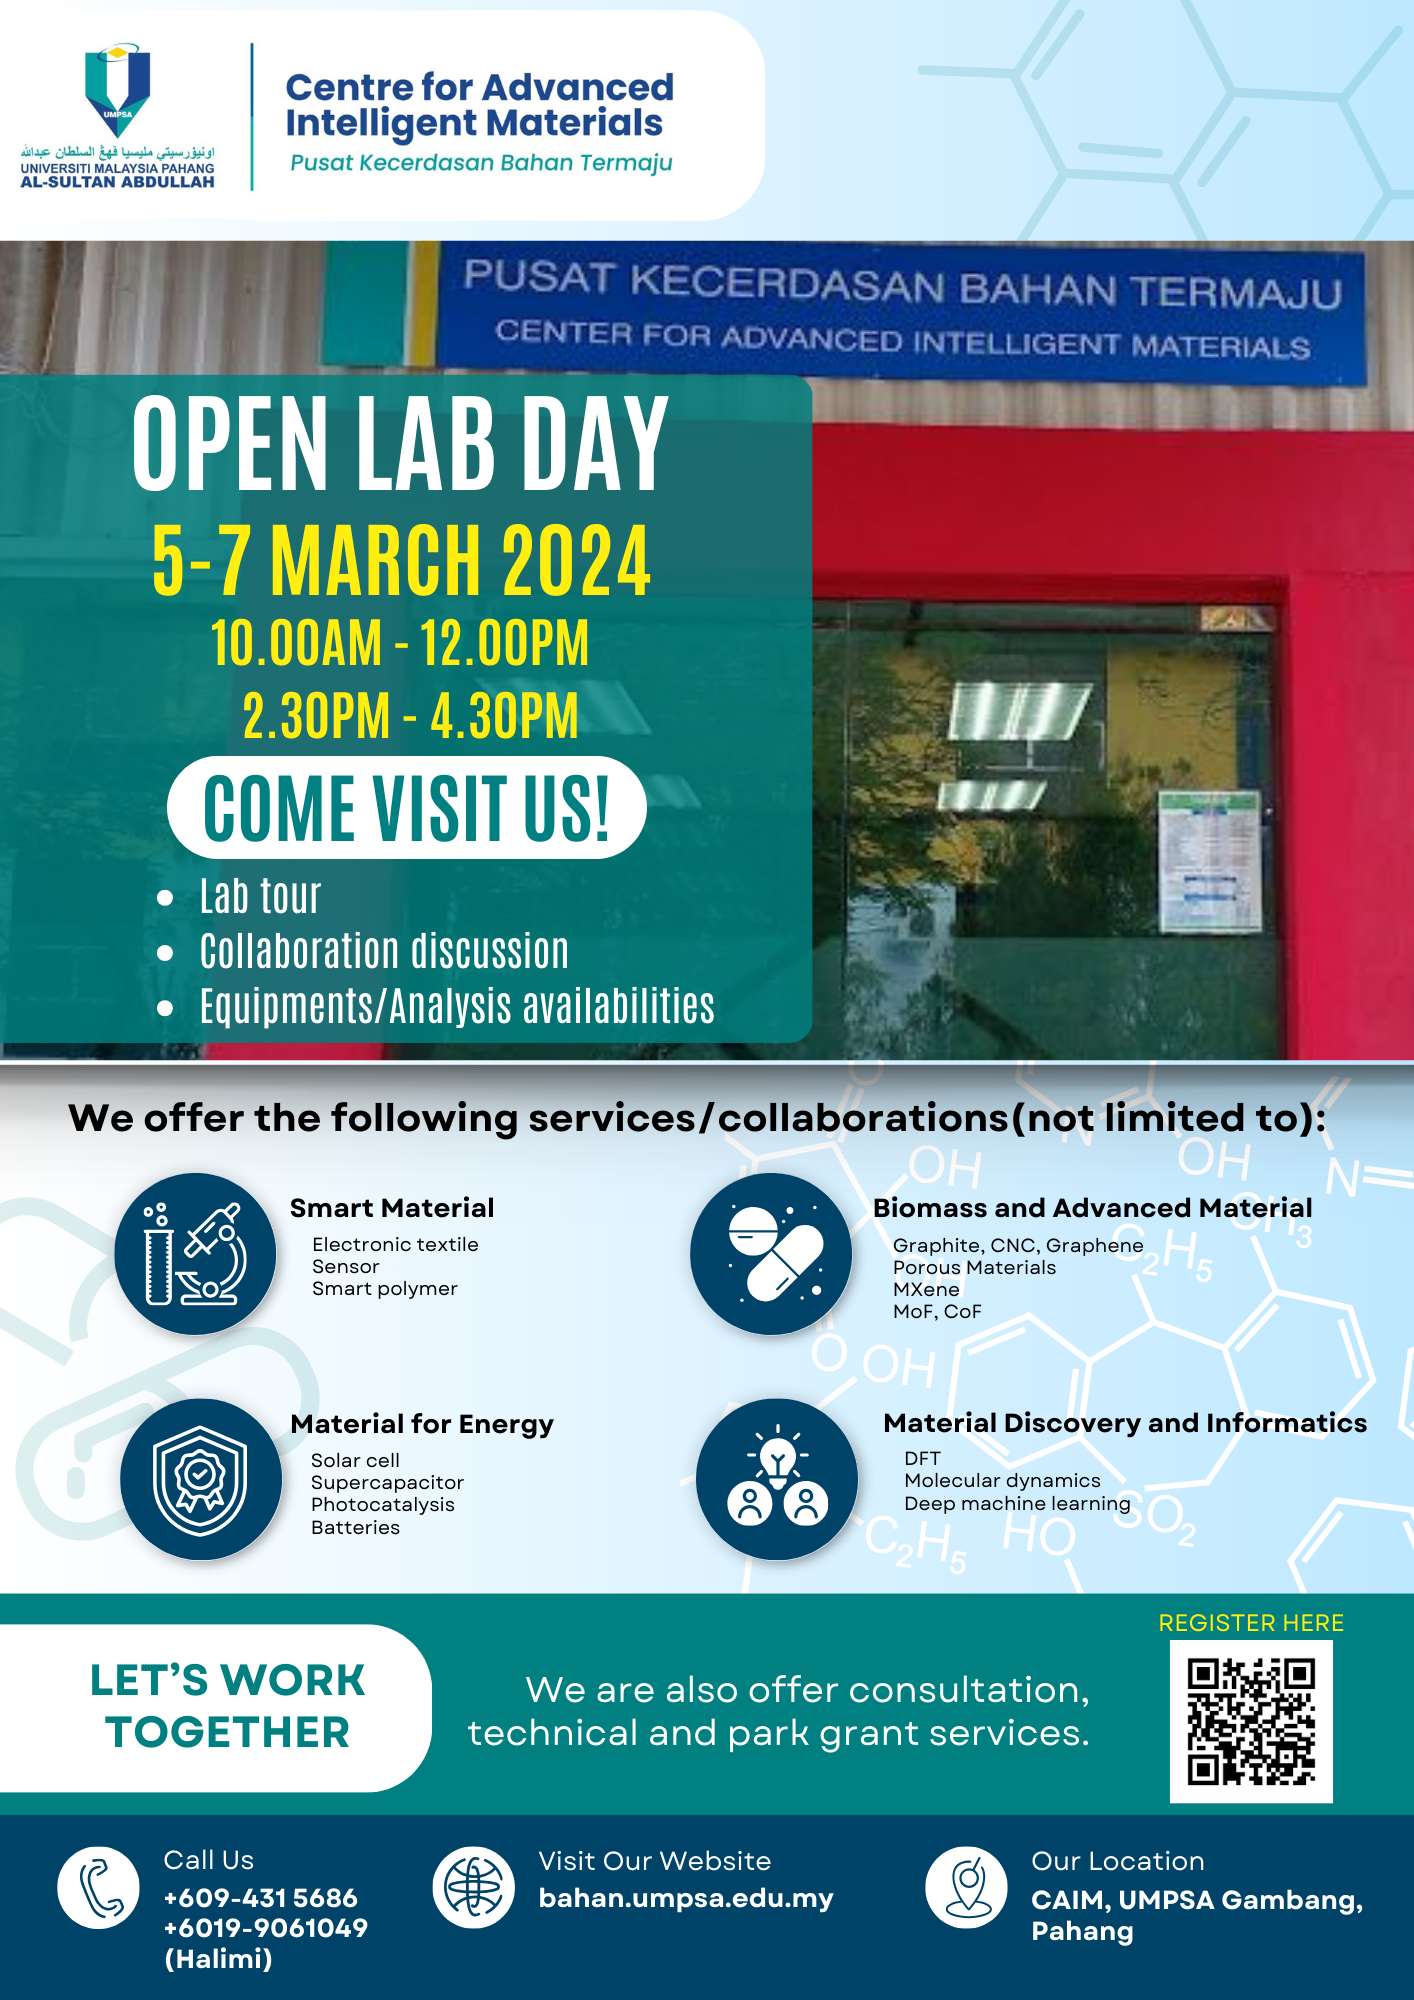 OPEN LAB DAY CAIM 2024